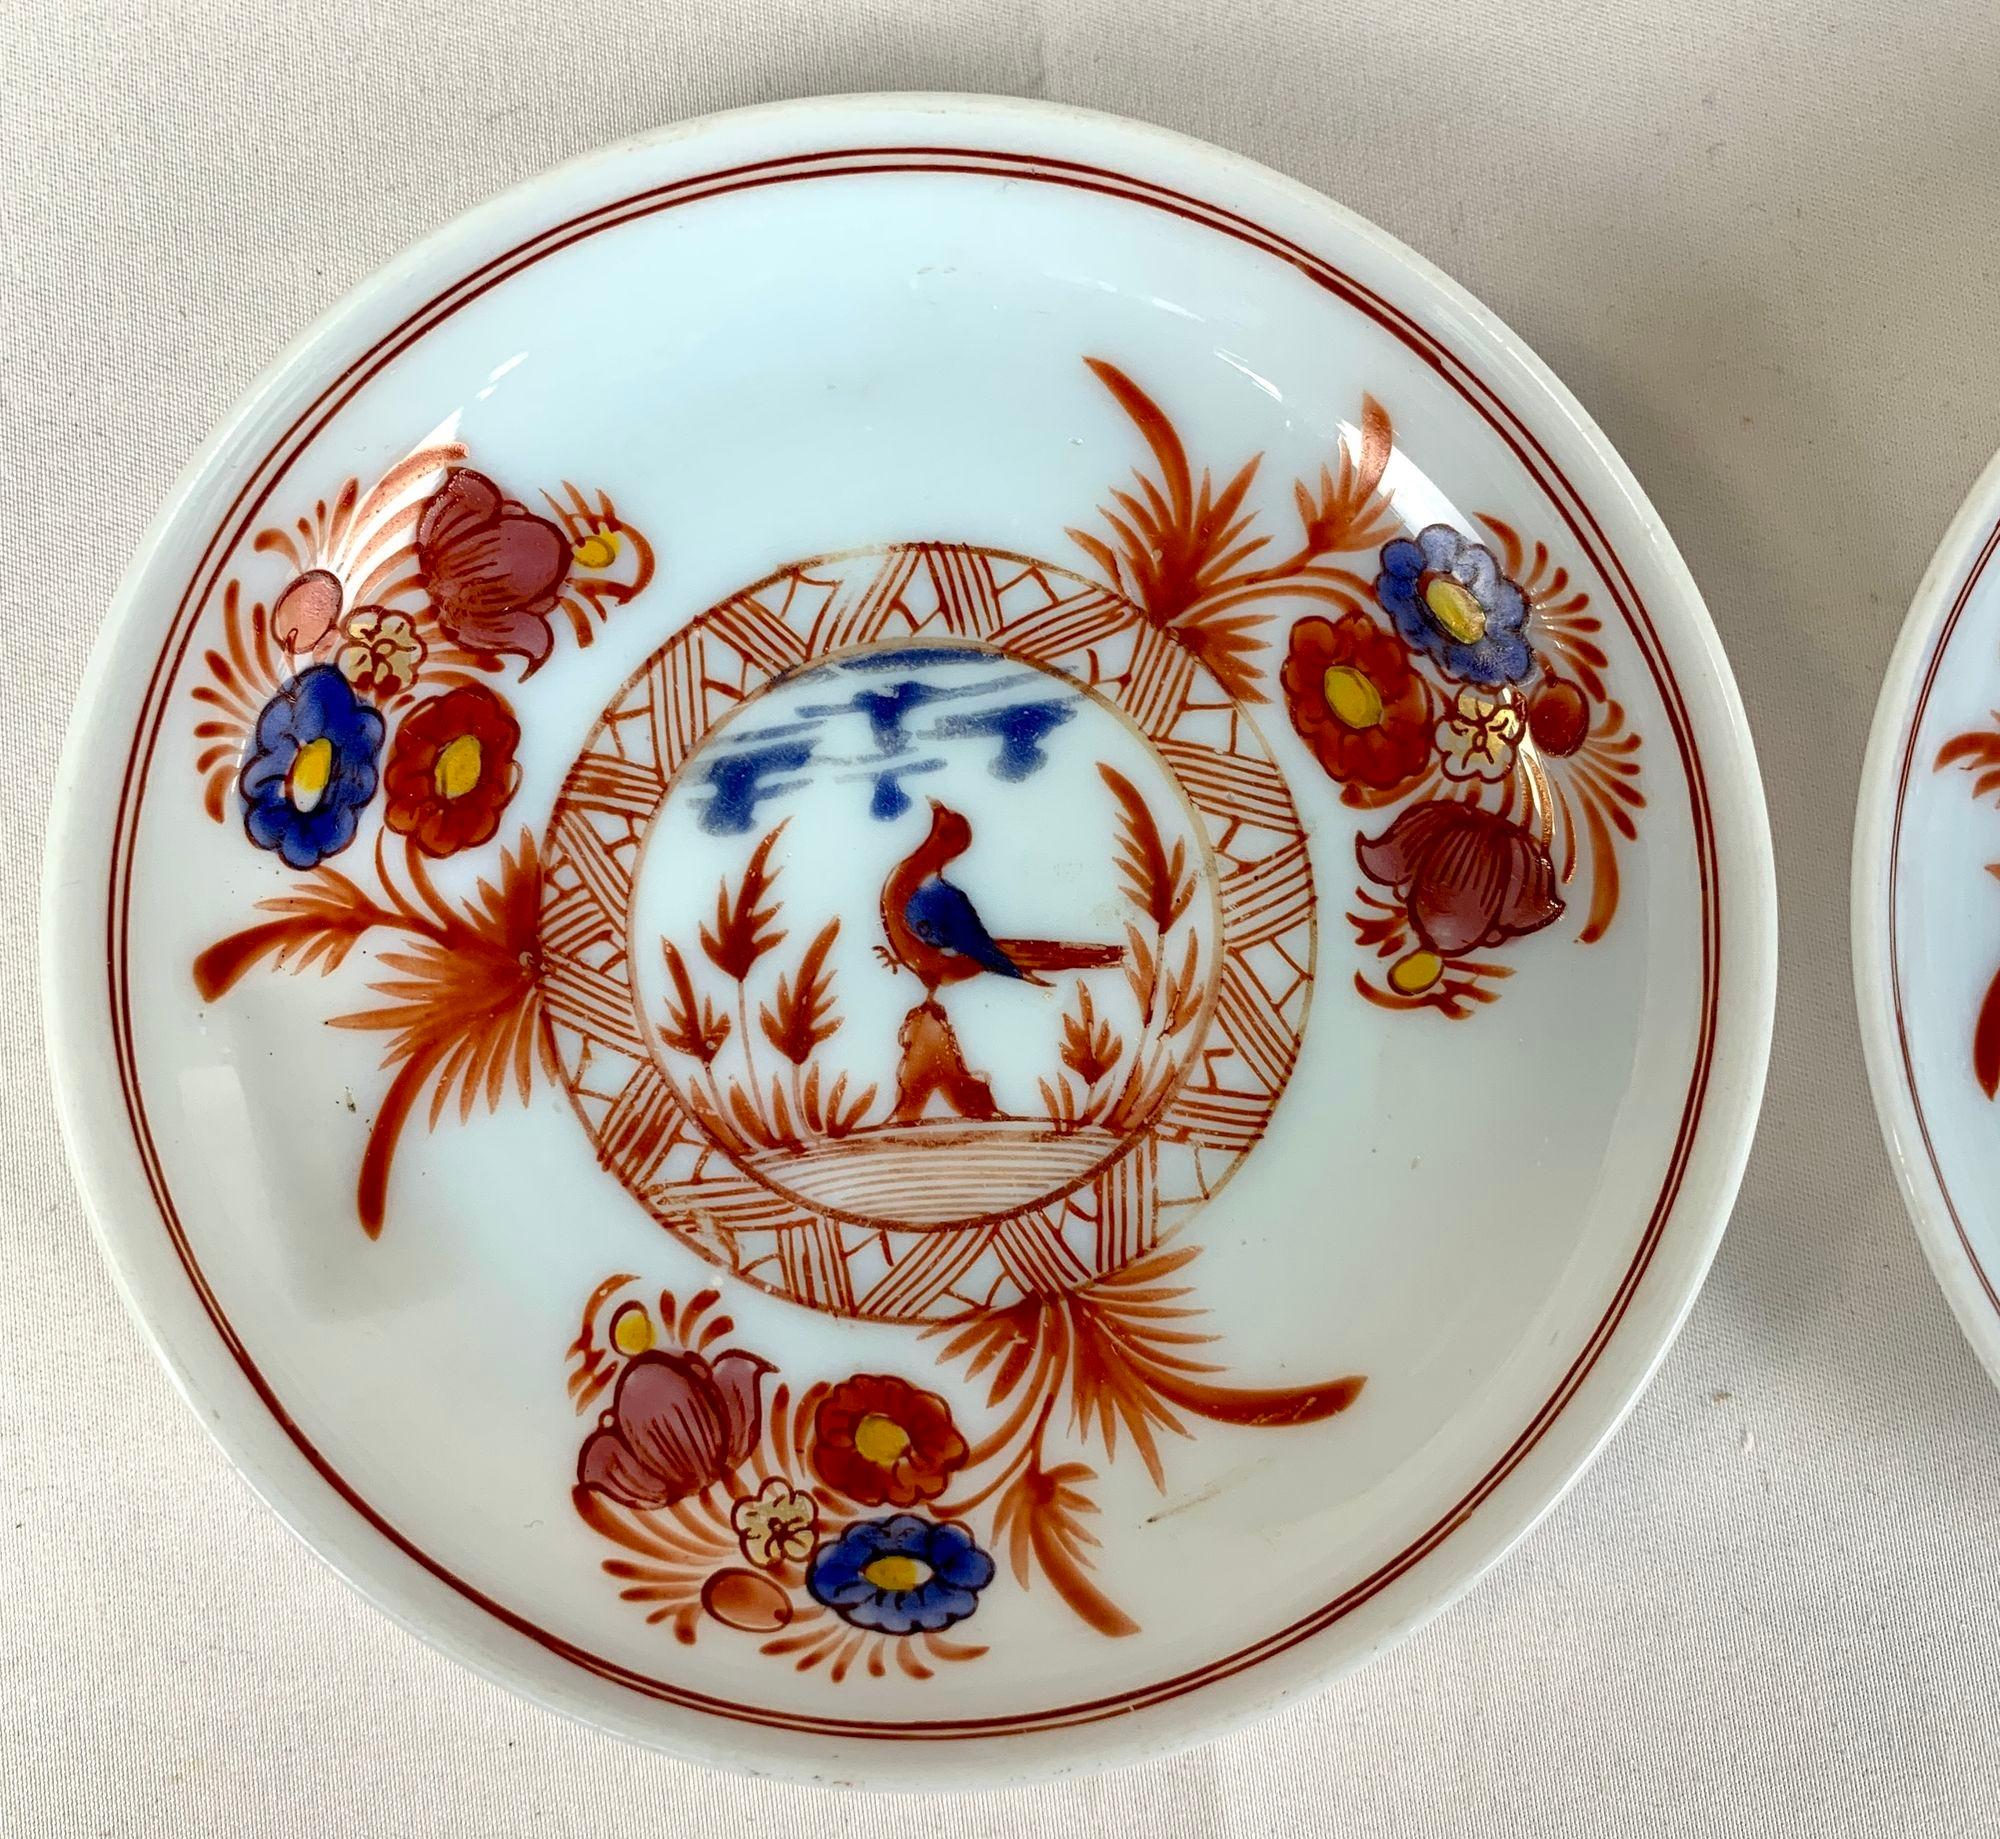 Hand blown circa 1860 this pair of Bohemian Glass saucers are little gems! .
We see a long-tailed songbird standing on rockwork, tilting his head up to sing his song out into the sky.
Around him are red leafy plants, and above is a blue sky all